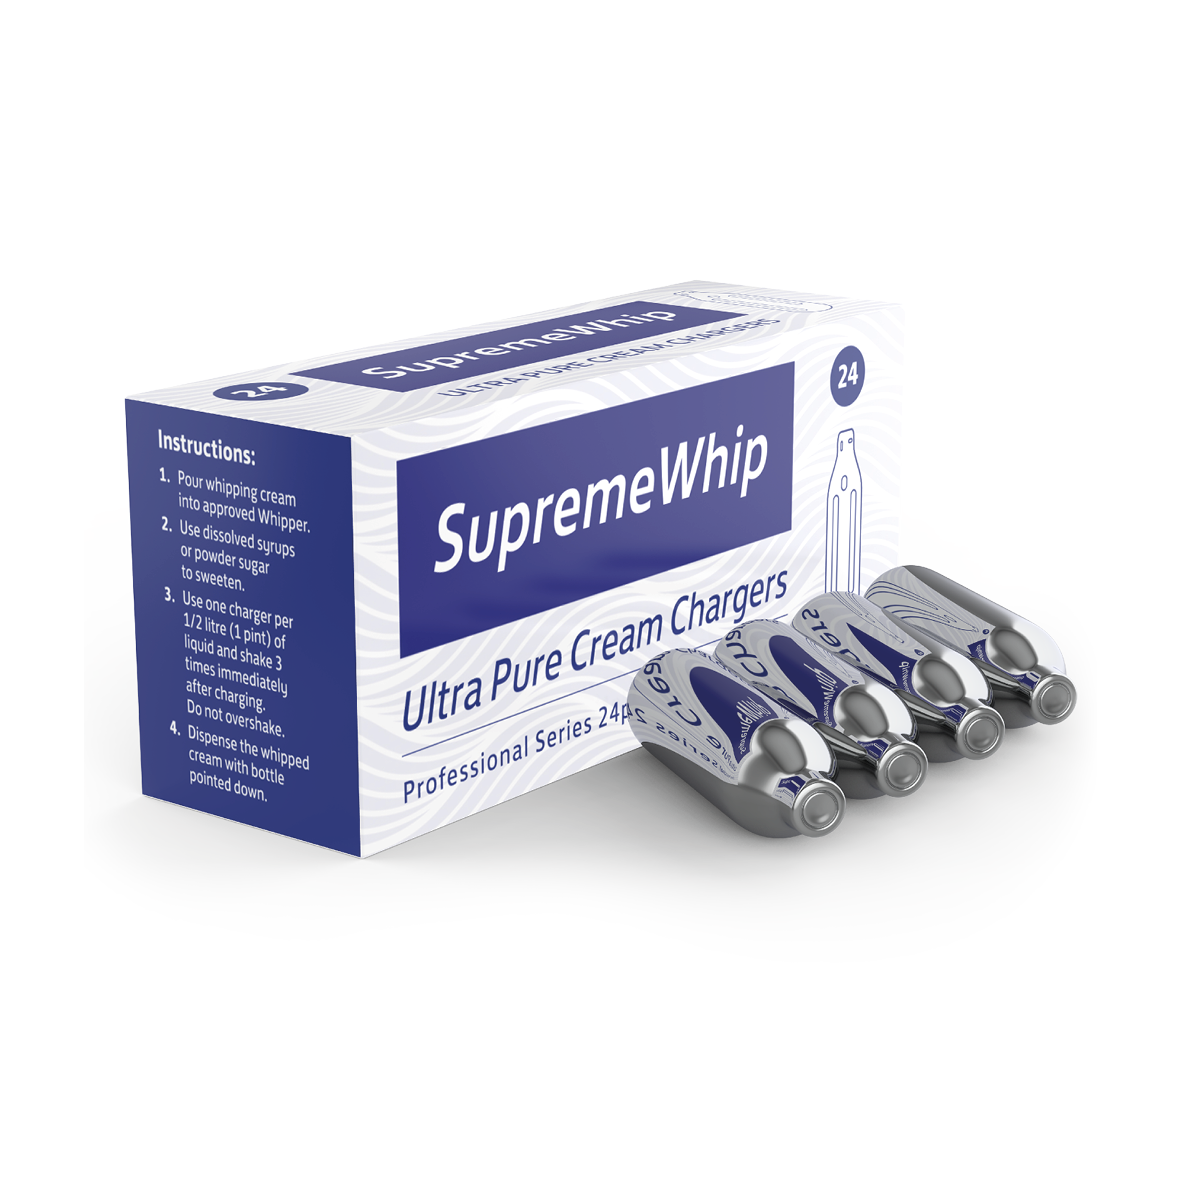 SupremeWhip Cream Chargers - 24 Pack Wholesale Enquires Contact Us